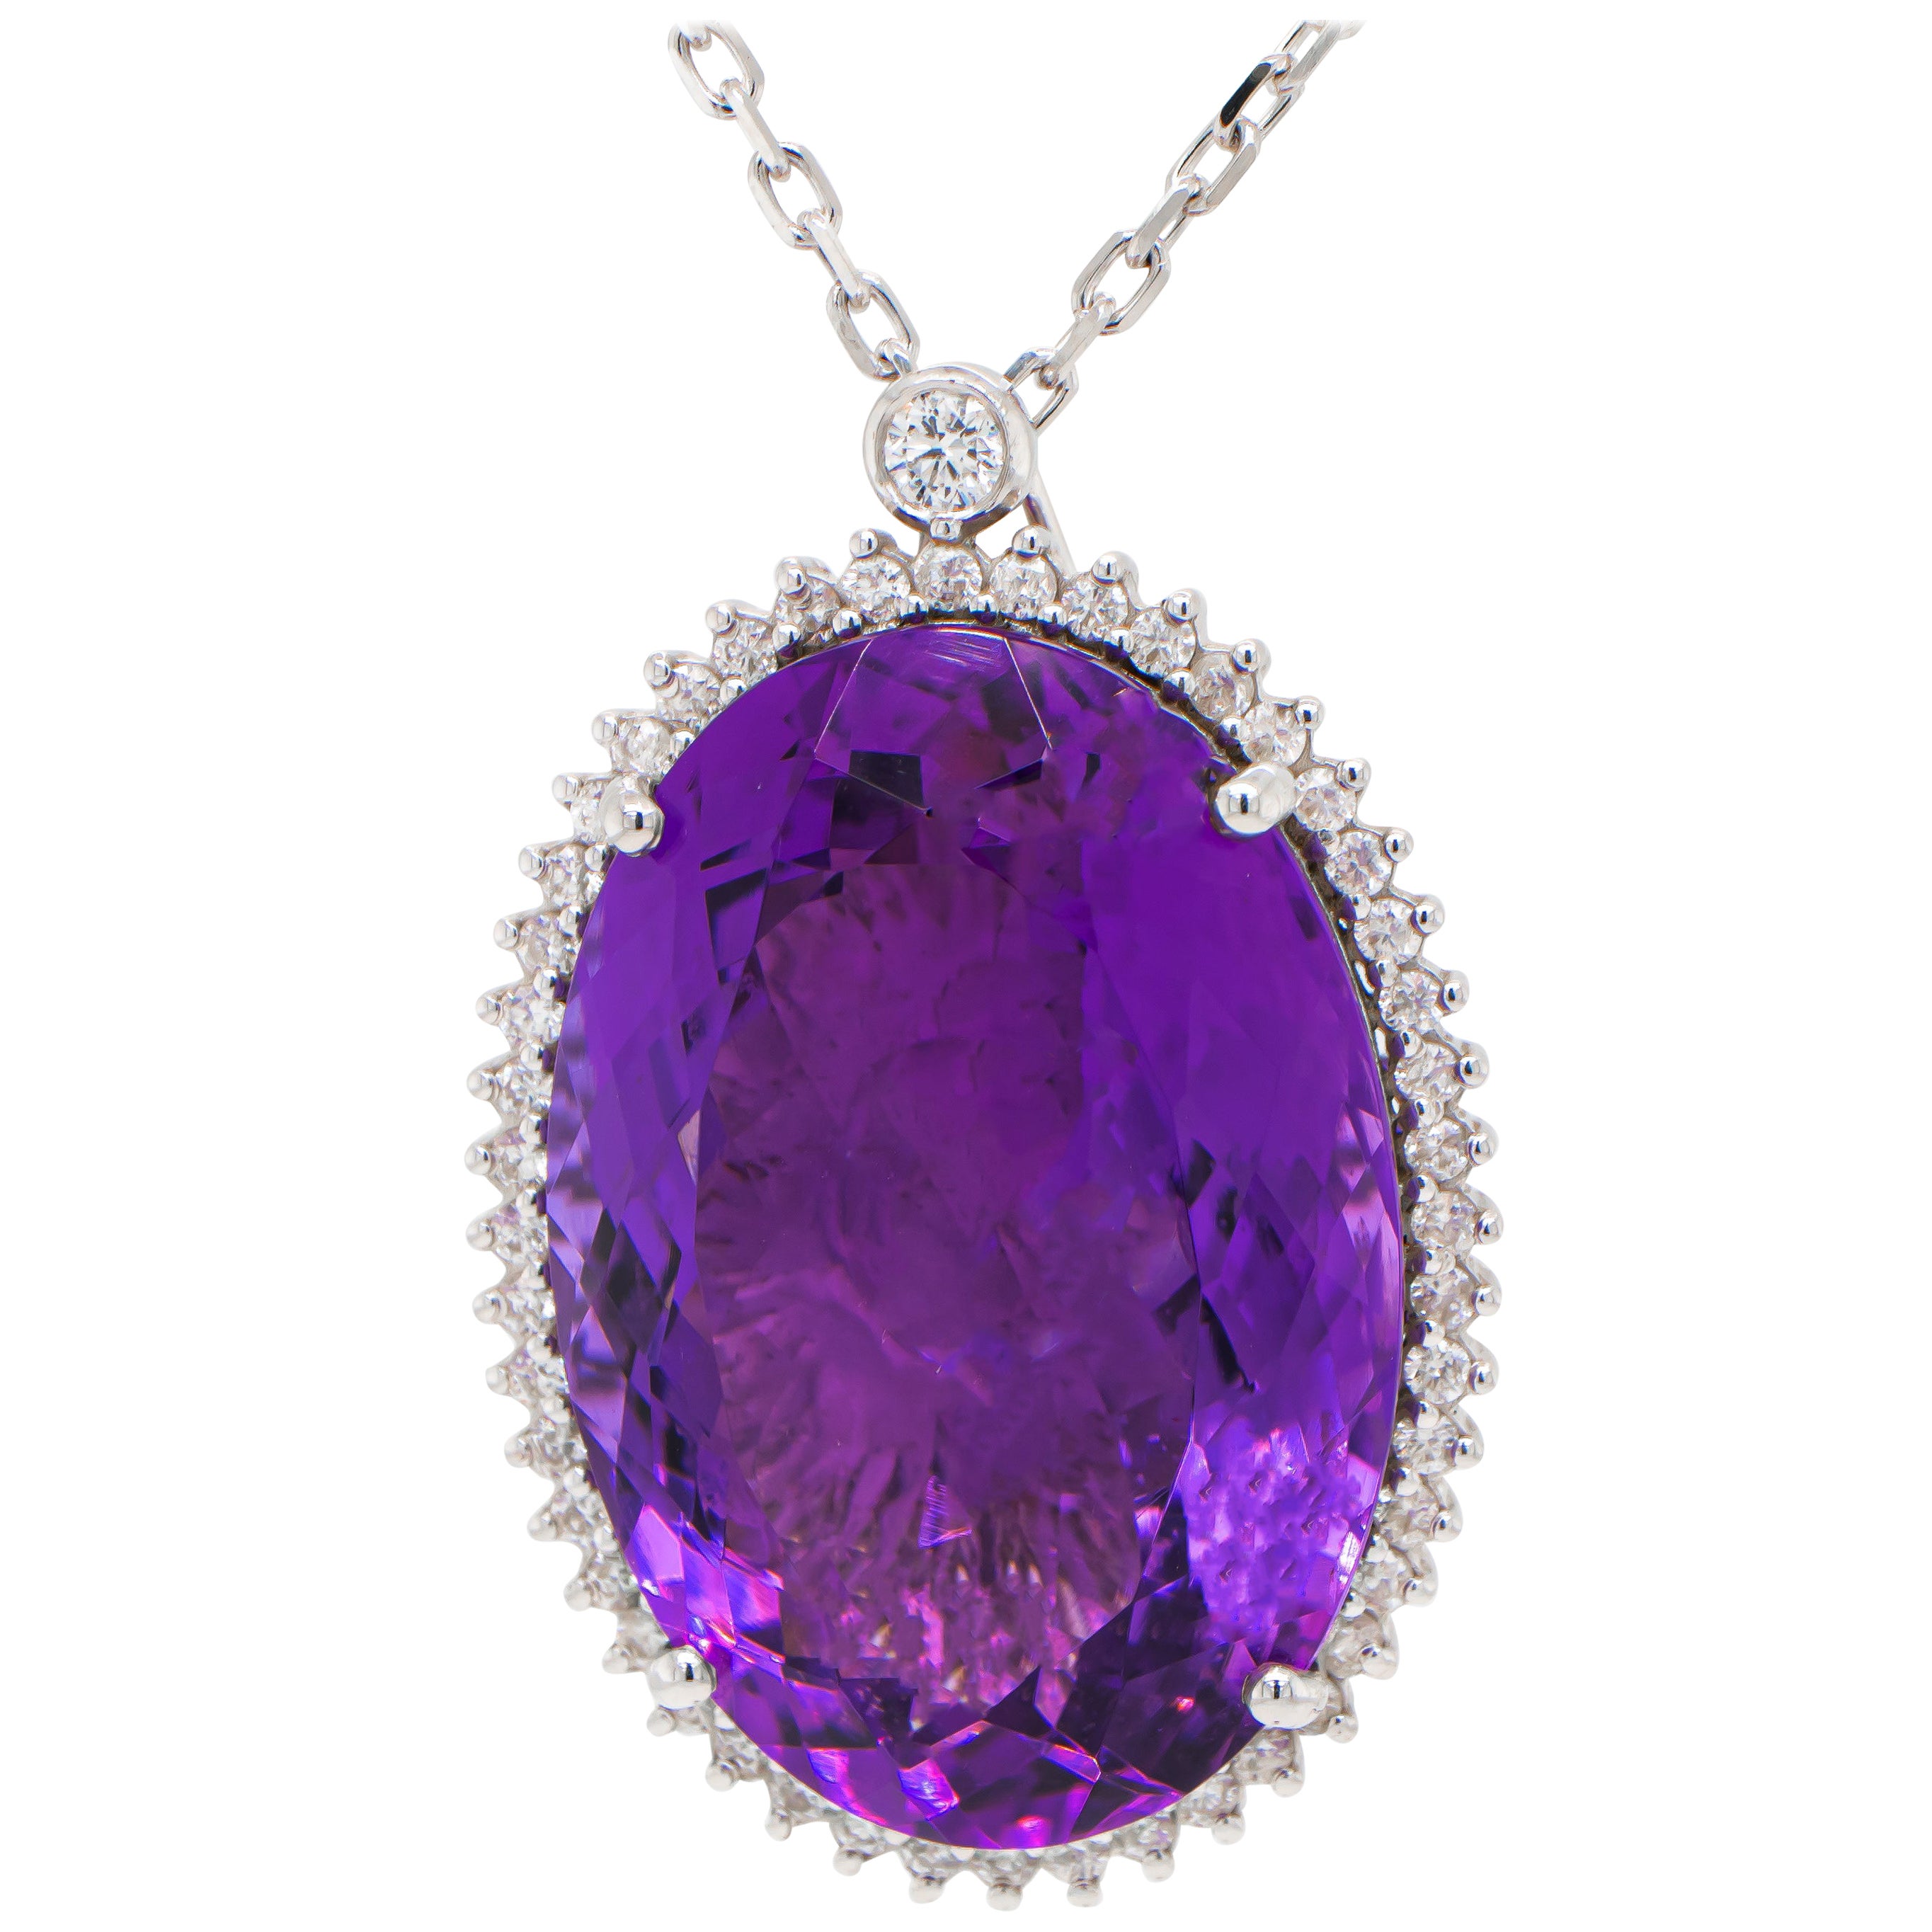 Oval Amethyst Pendant 36.5 Carats with Diamonds 18K Gold